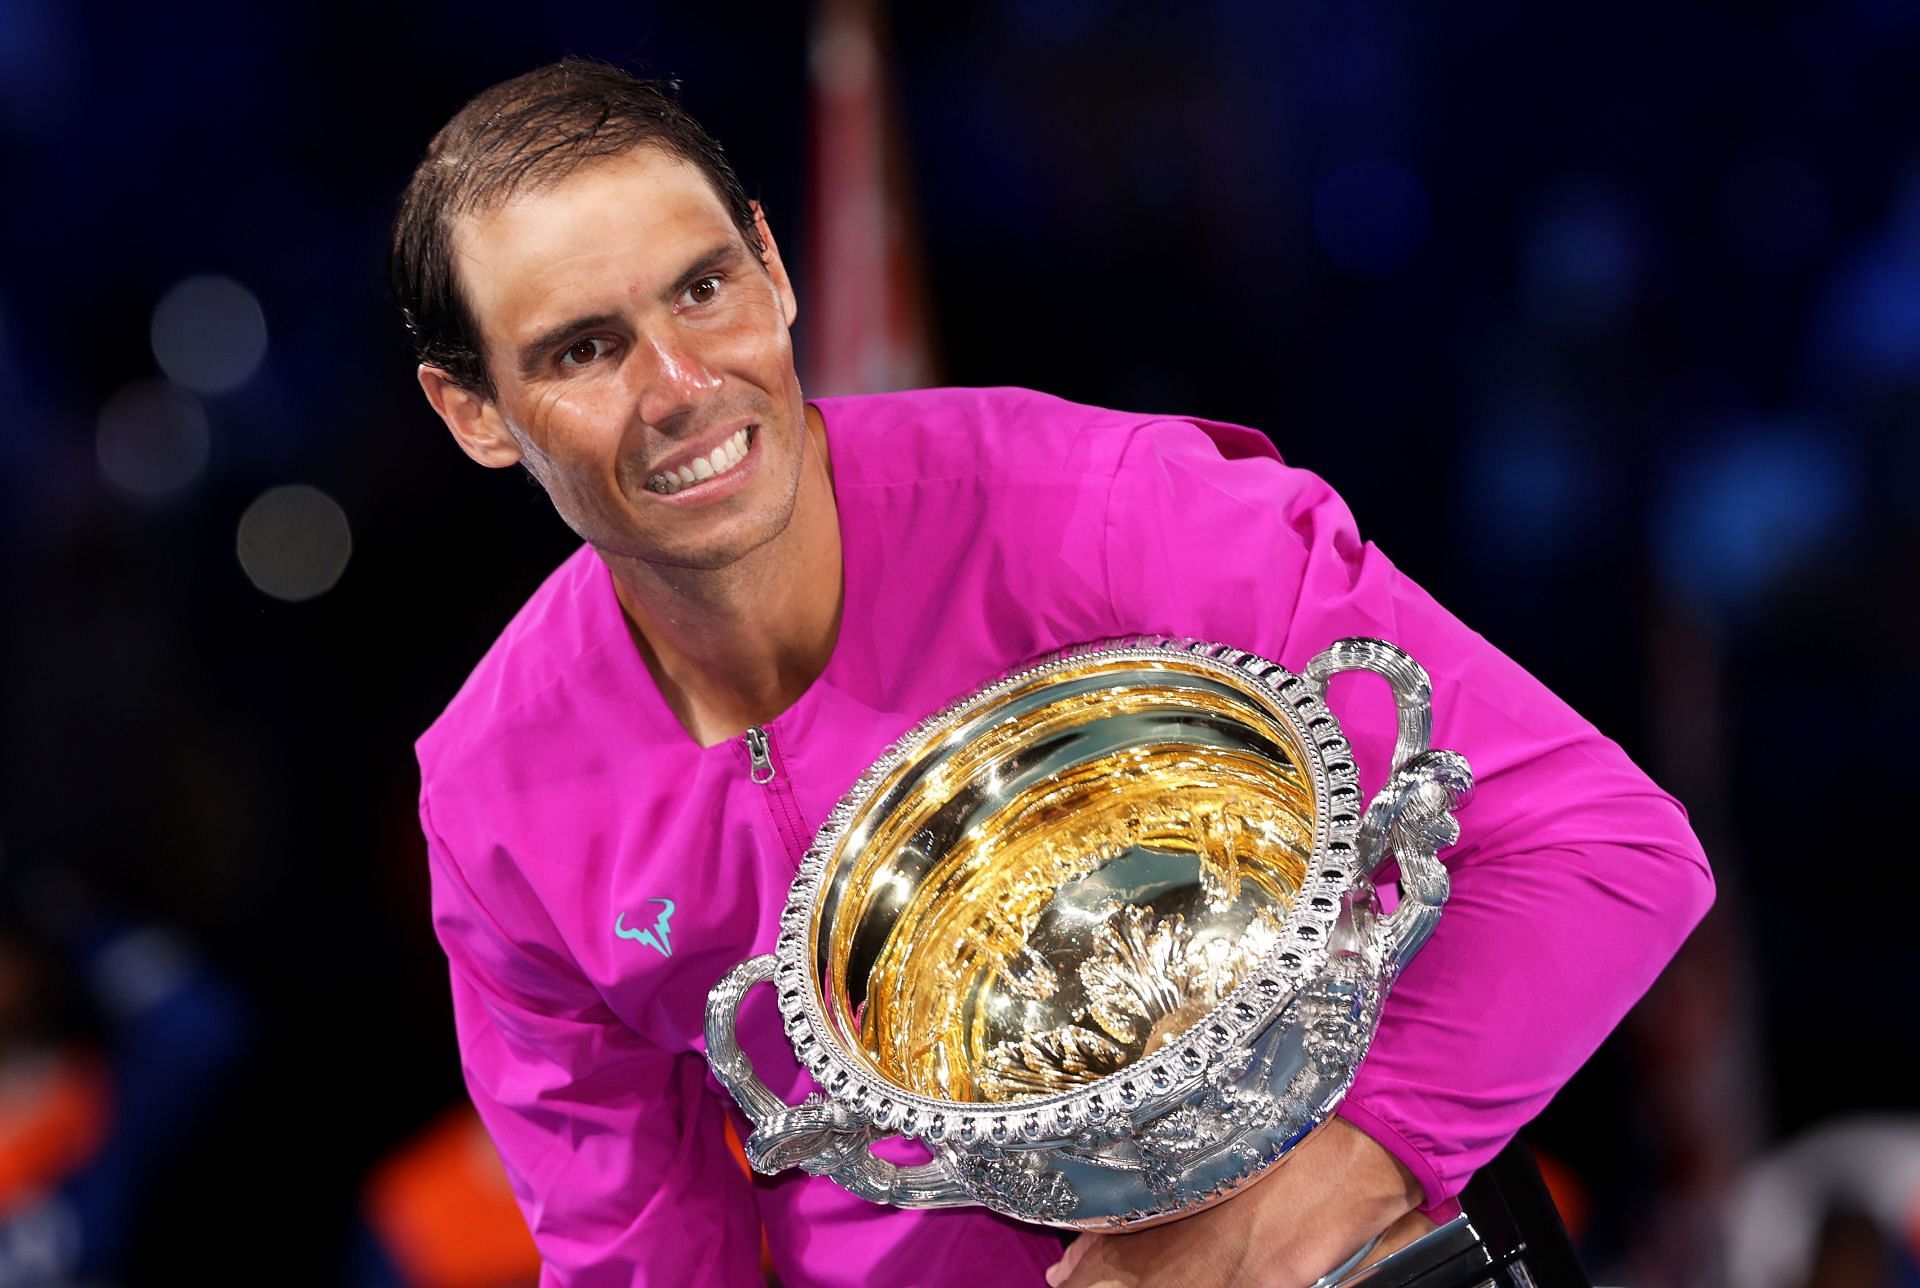 Nadal with the 2022 Australian Open trophy